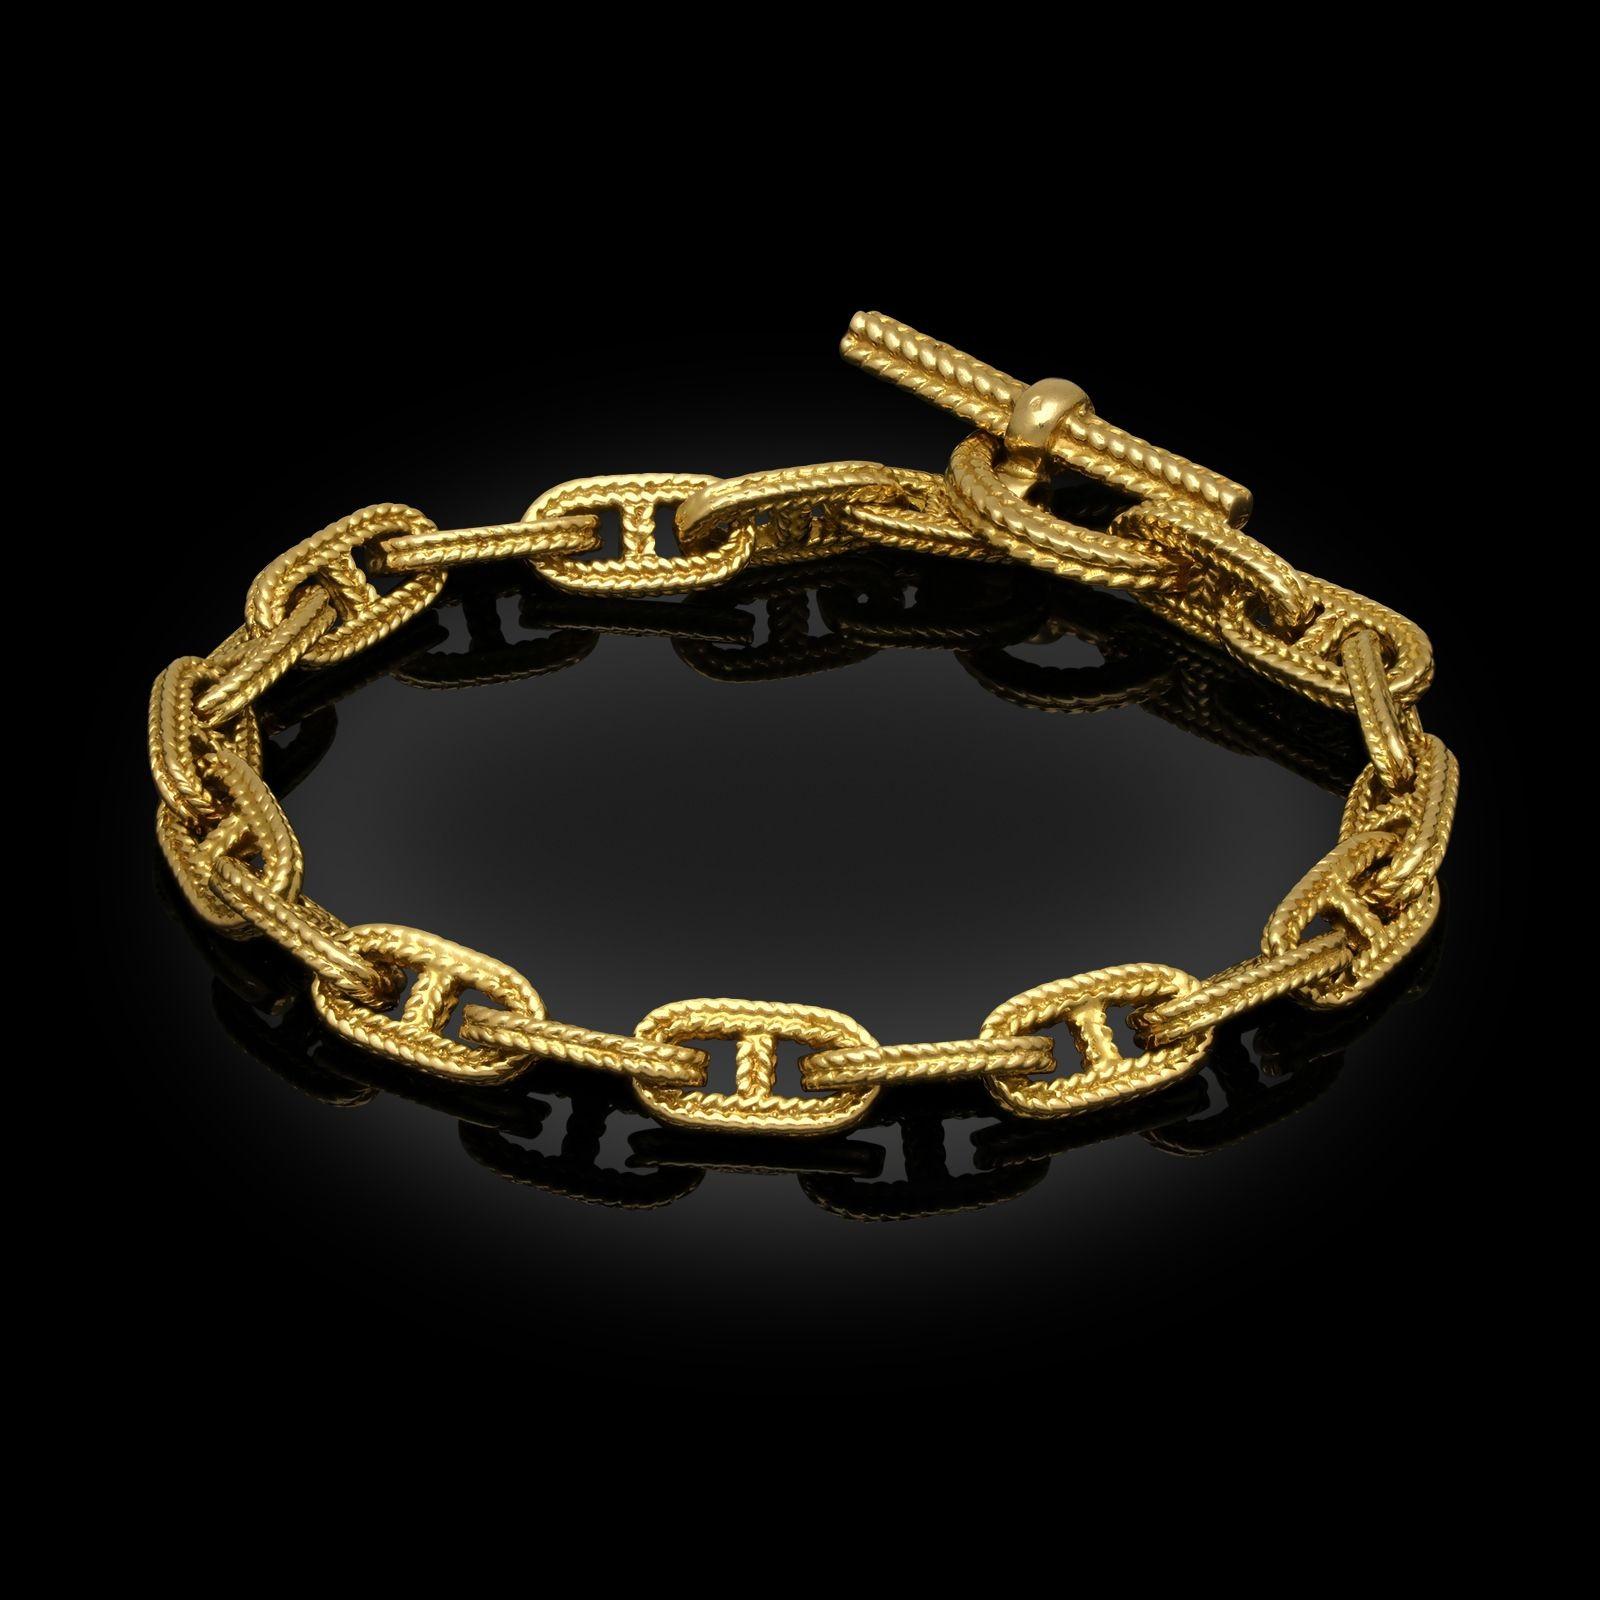 French Vintage 18ct Gold 'Chaîne d'Ancre' Style Bracelet Ca 1970 In Excellent Condition For Sale In London, GB